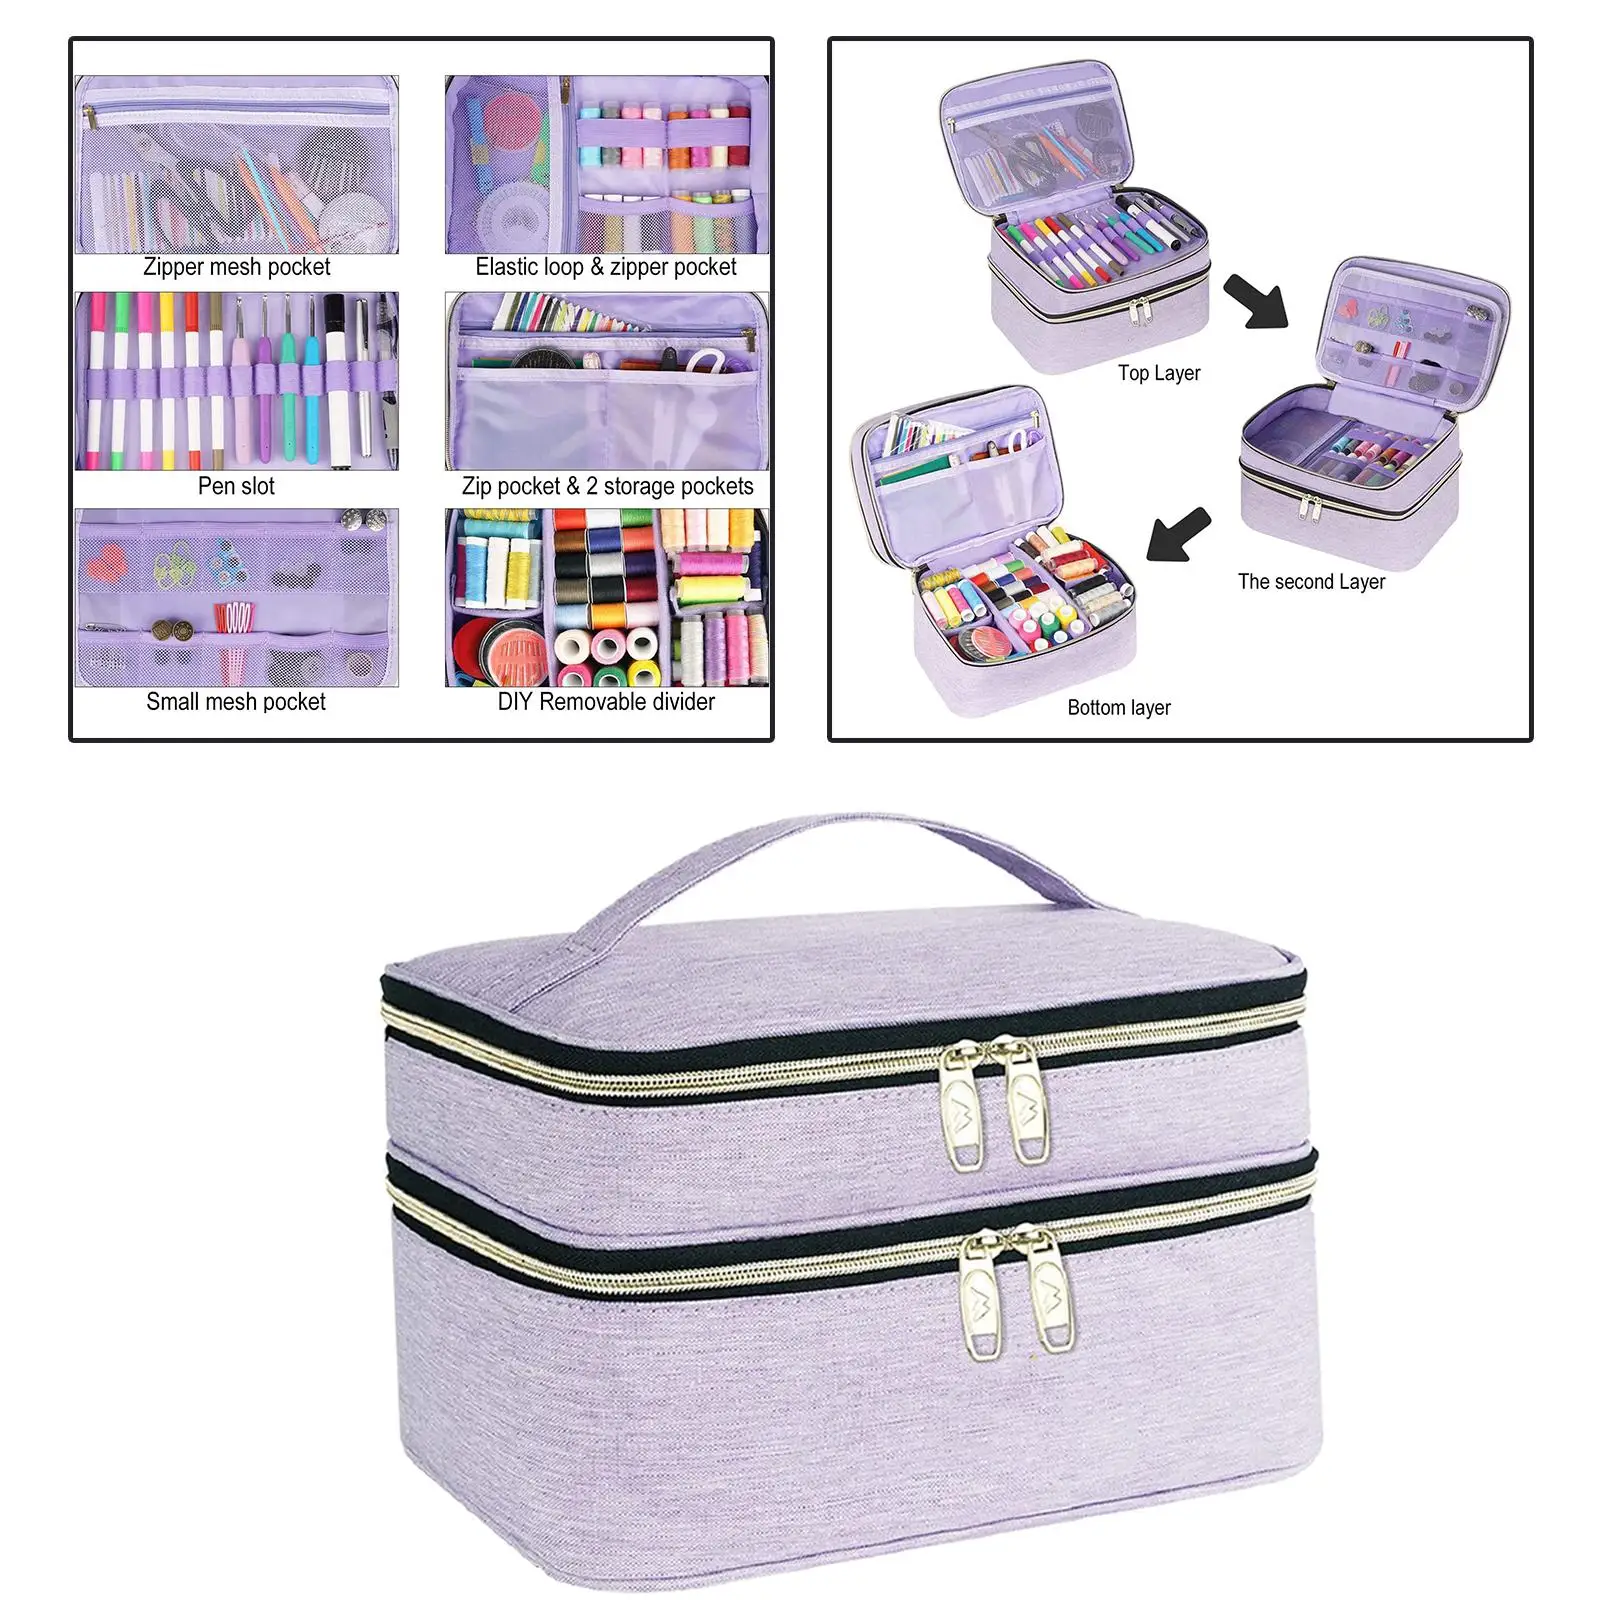 Sewing Supplies Storage Bag Double Layer Sewing Kits Carrying Bag Portable Polyester Case for Sewing Tools  Buttons Clips